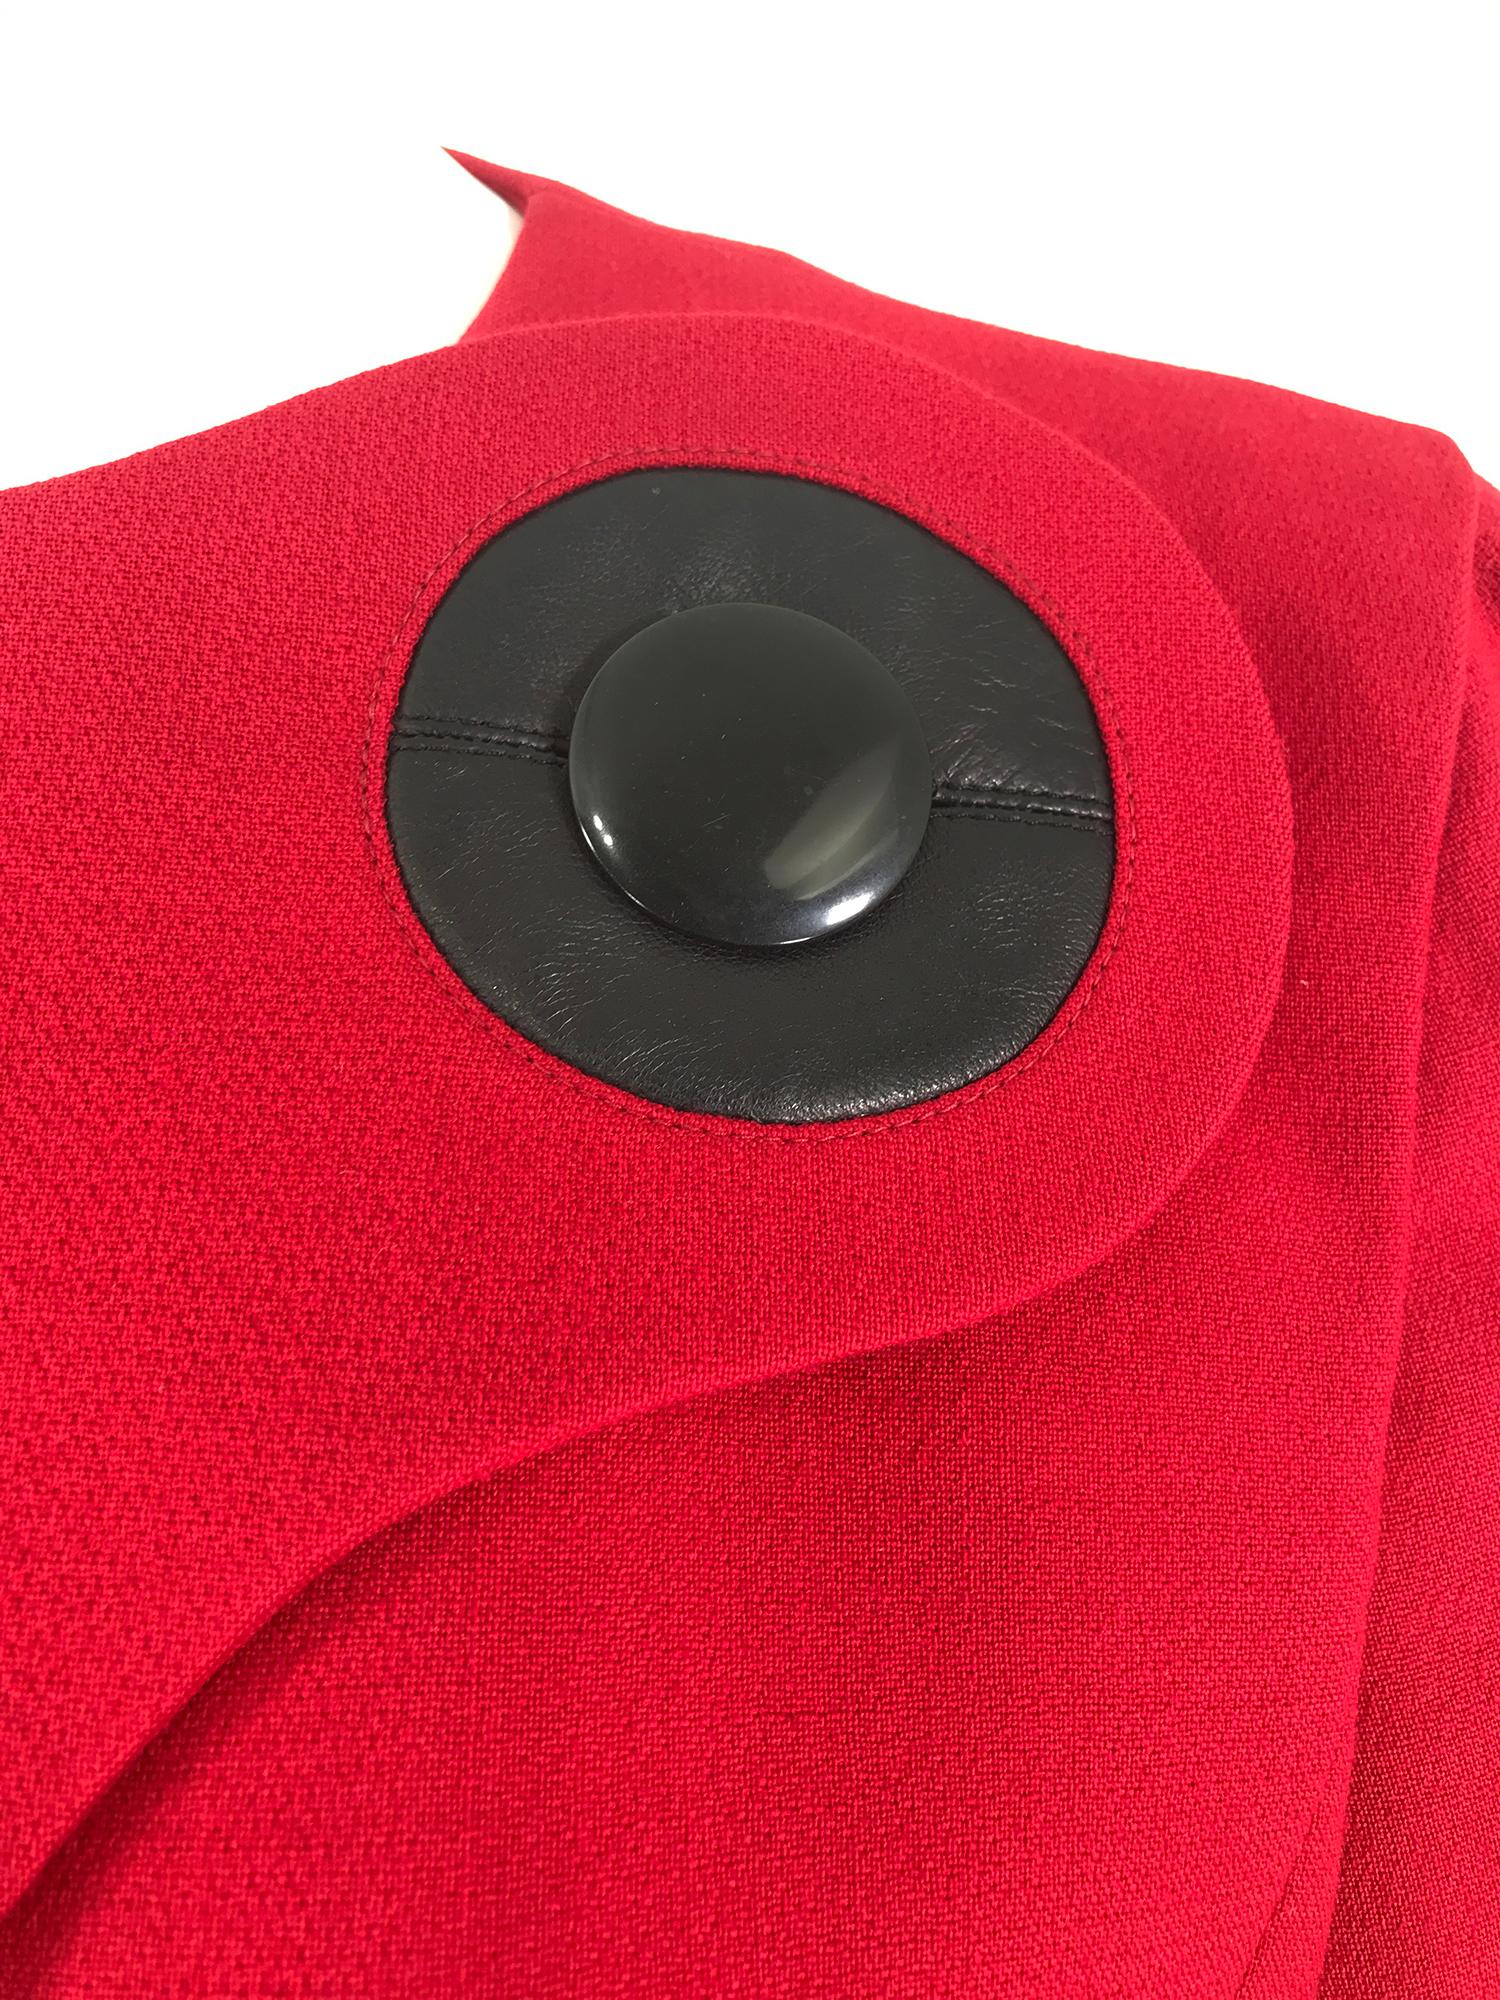 Boutique Pierre Cardin Paris red wool space age jacket 1960s, rare label. Red wool princess seam jacket with wrist length sleeves. The jacket has hip front on seam pockets. The Jacket curves to the top left side front forming a semi circle, set in